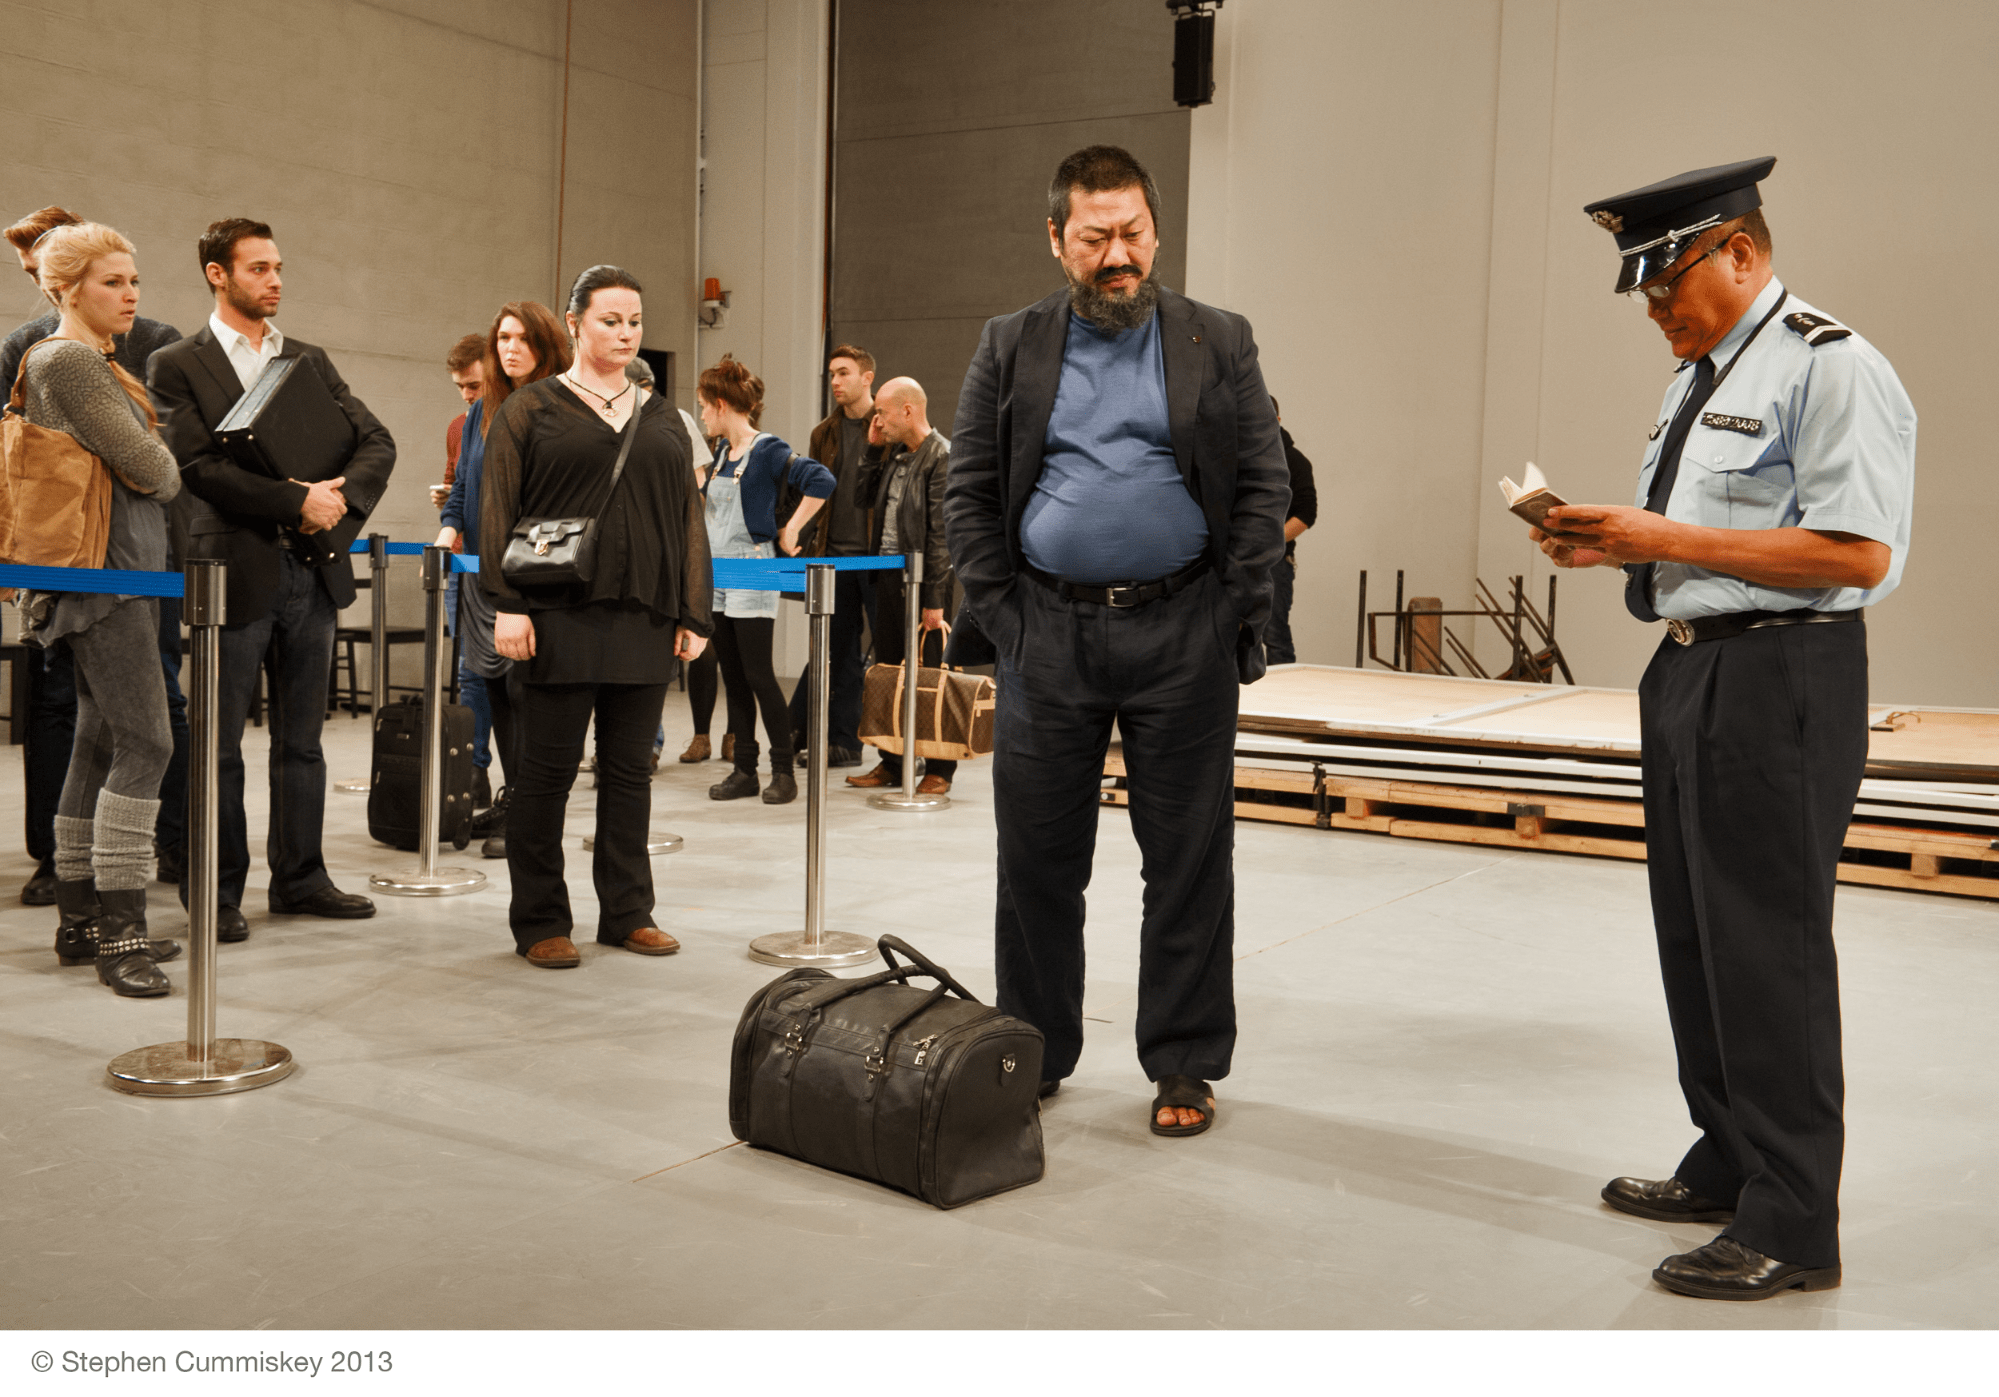 online theatre plays: #AIWW: The Arrest of Ai WeiWei